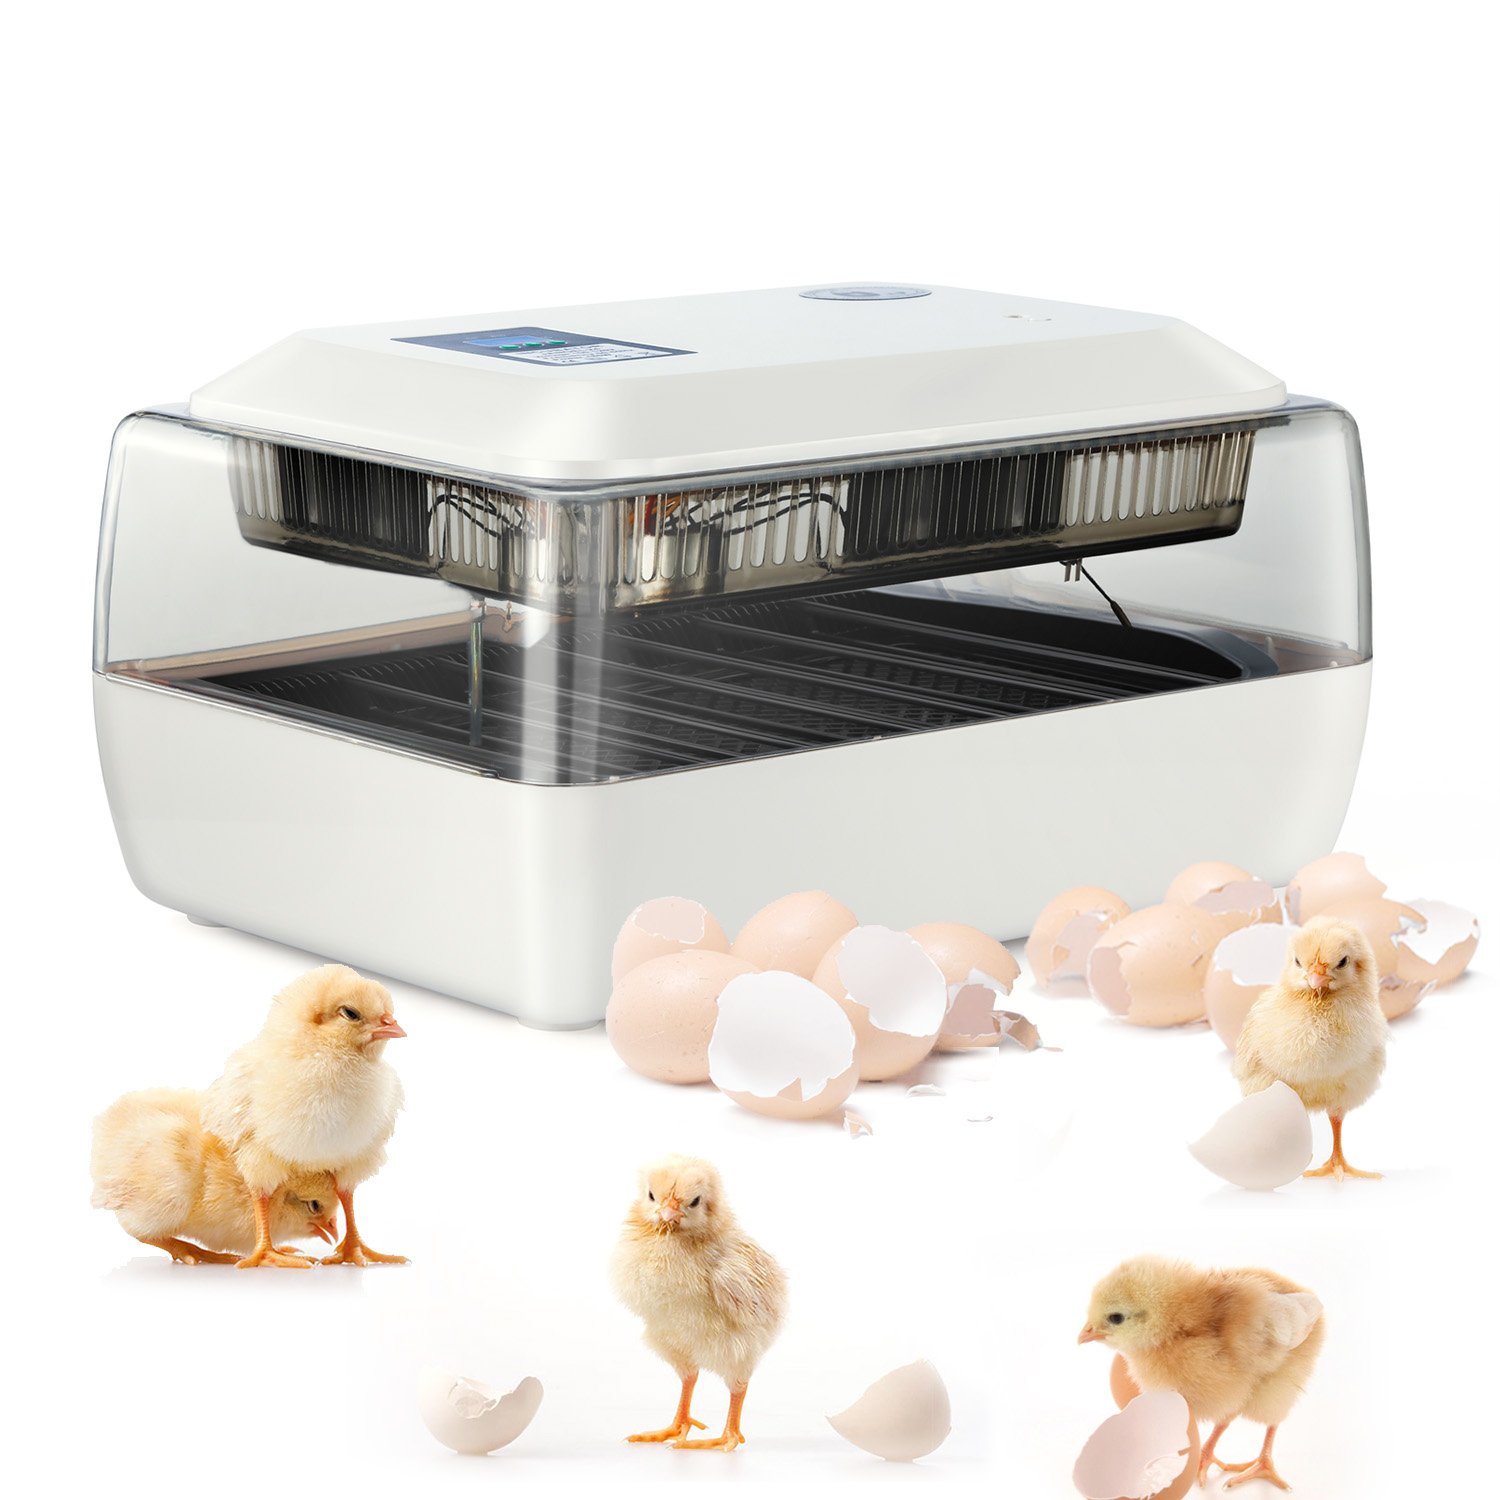 Digital Fully Automatic Egg Incubator 24 Eggs Poultry ...